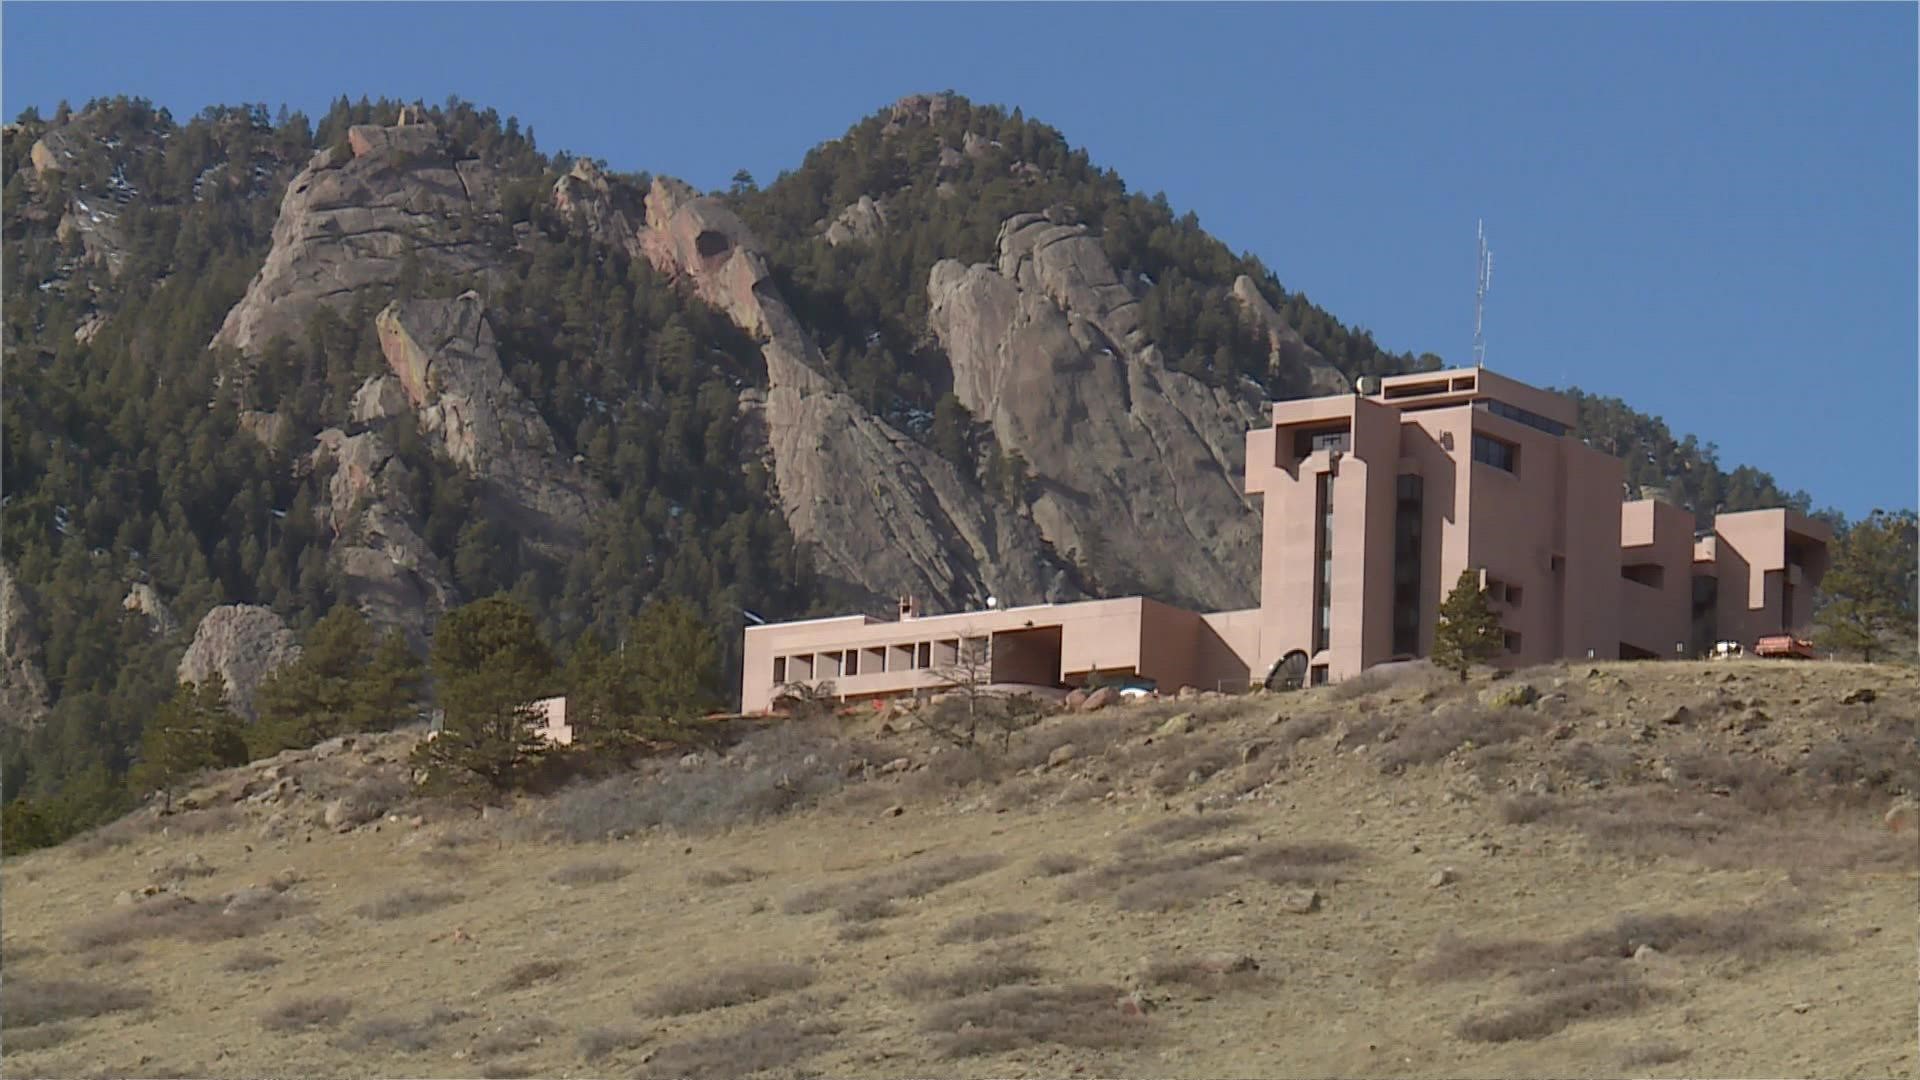 NCAR's Mesa Lab in Boulder has reopened to the public for the first time since the COVID shutdown more than two years ago.